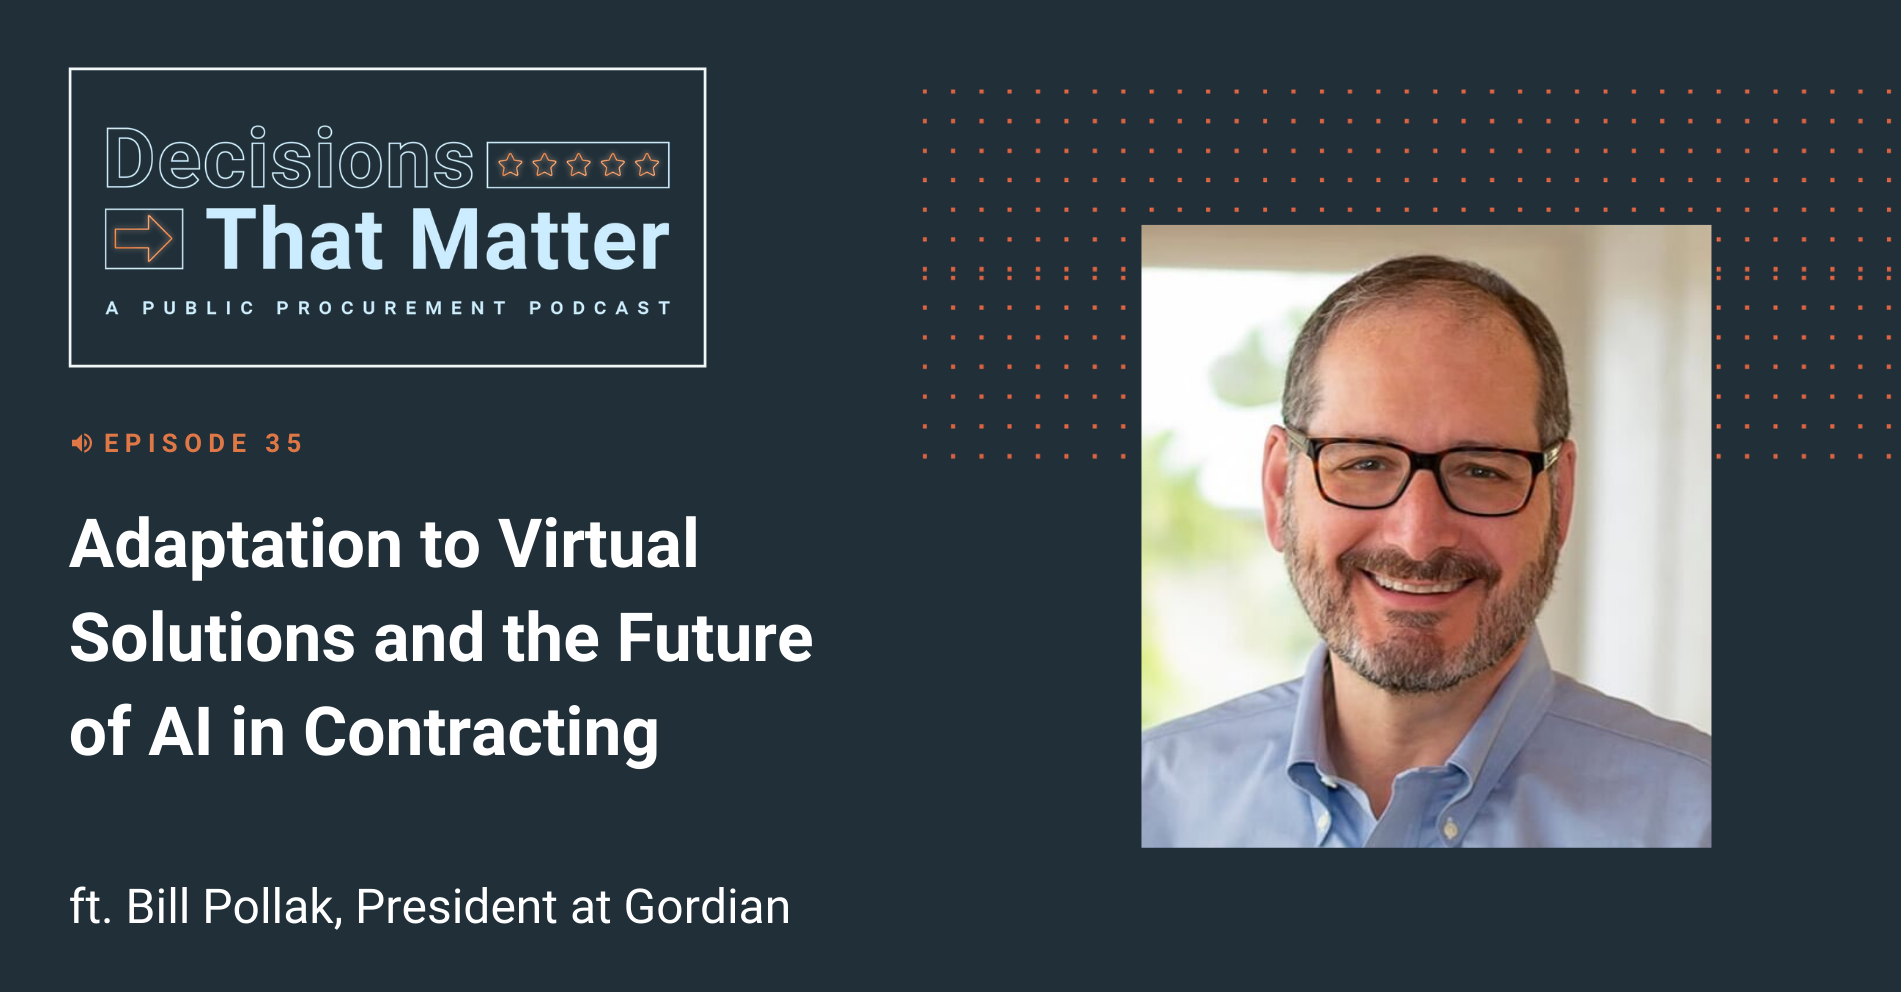 Gordian's Bill Pollak Discusses Adaptation to Virtual Solutions and the Future of AI in Contracting